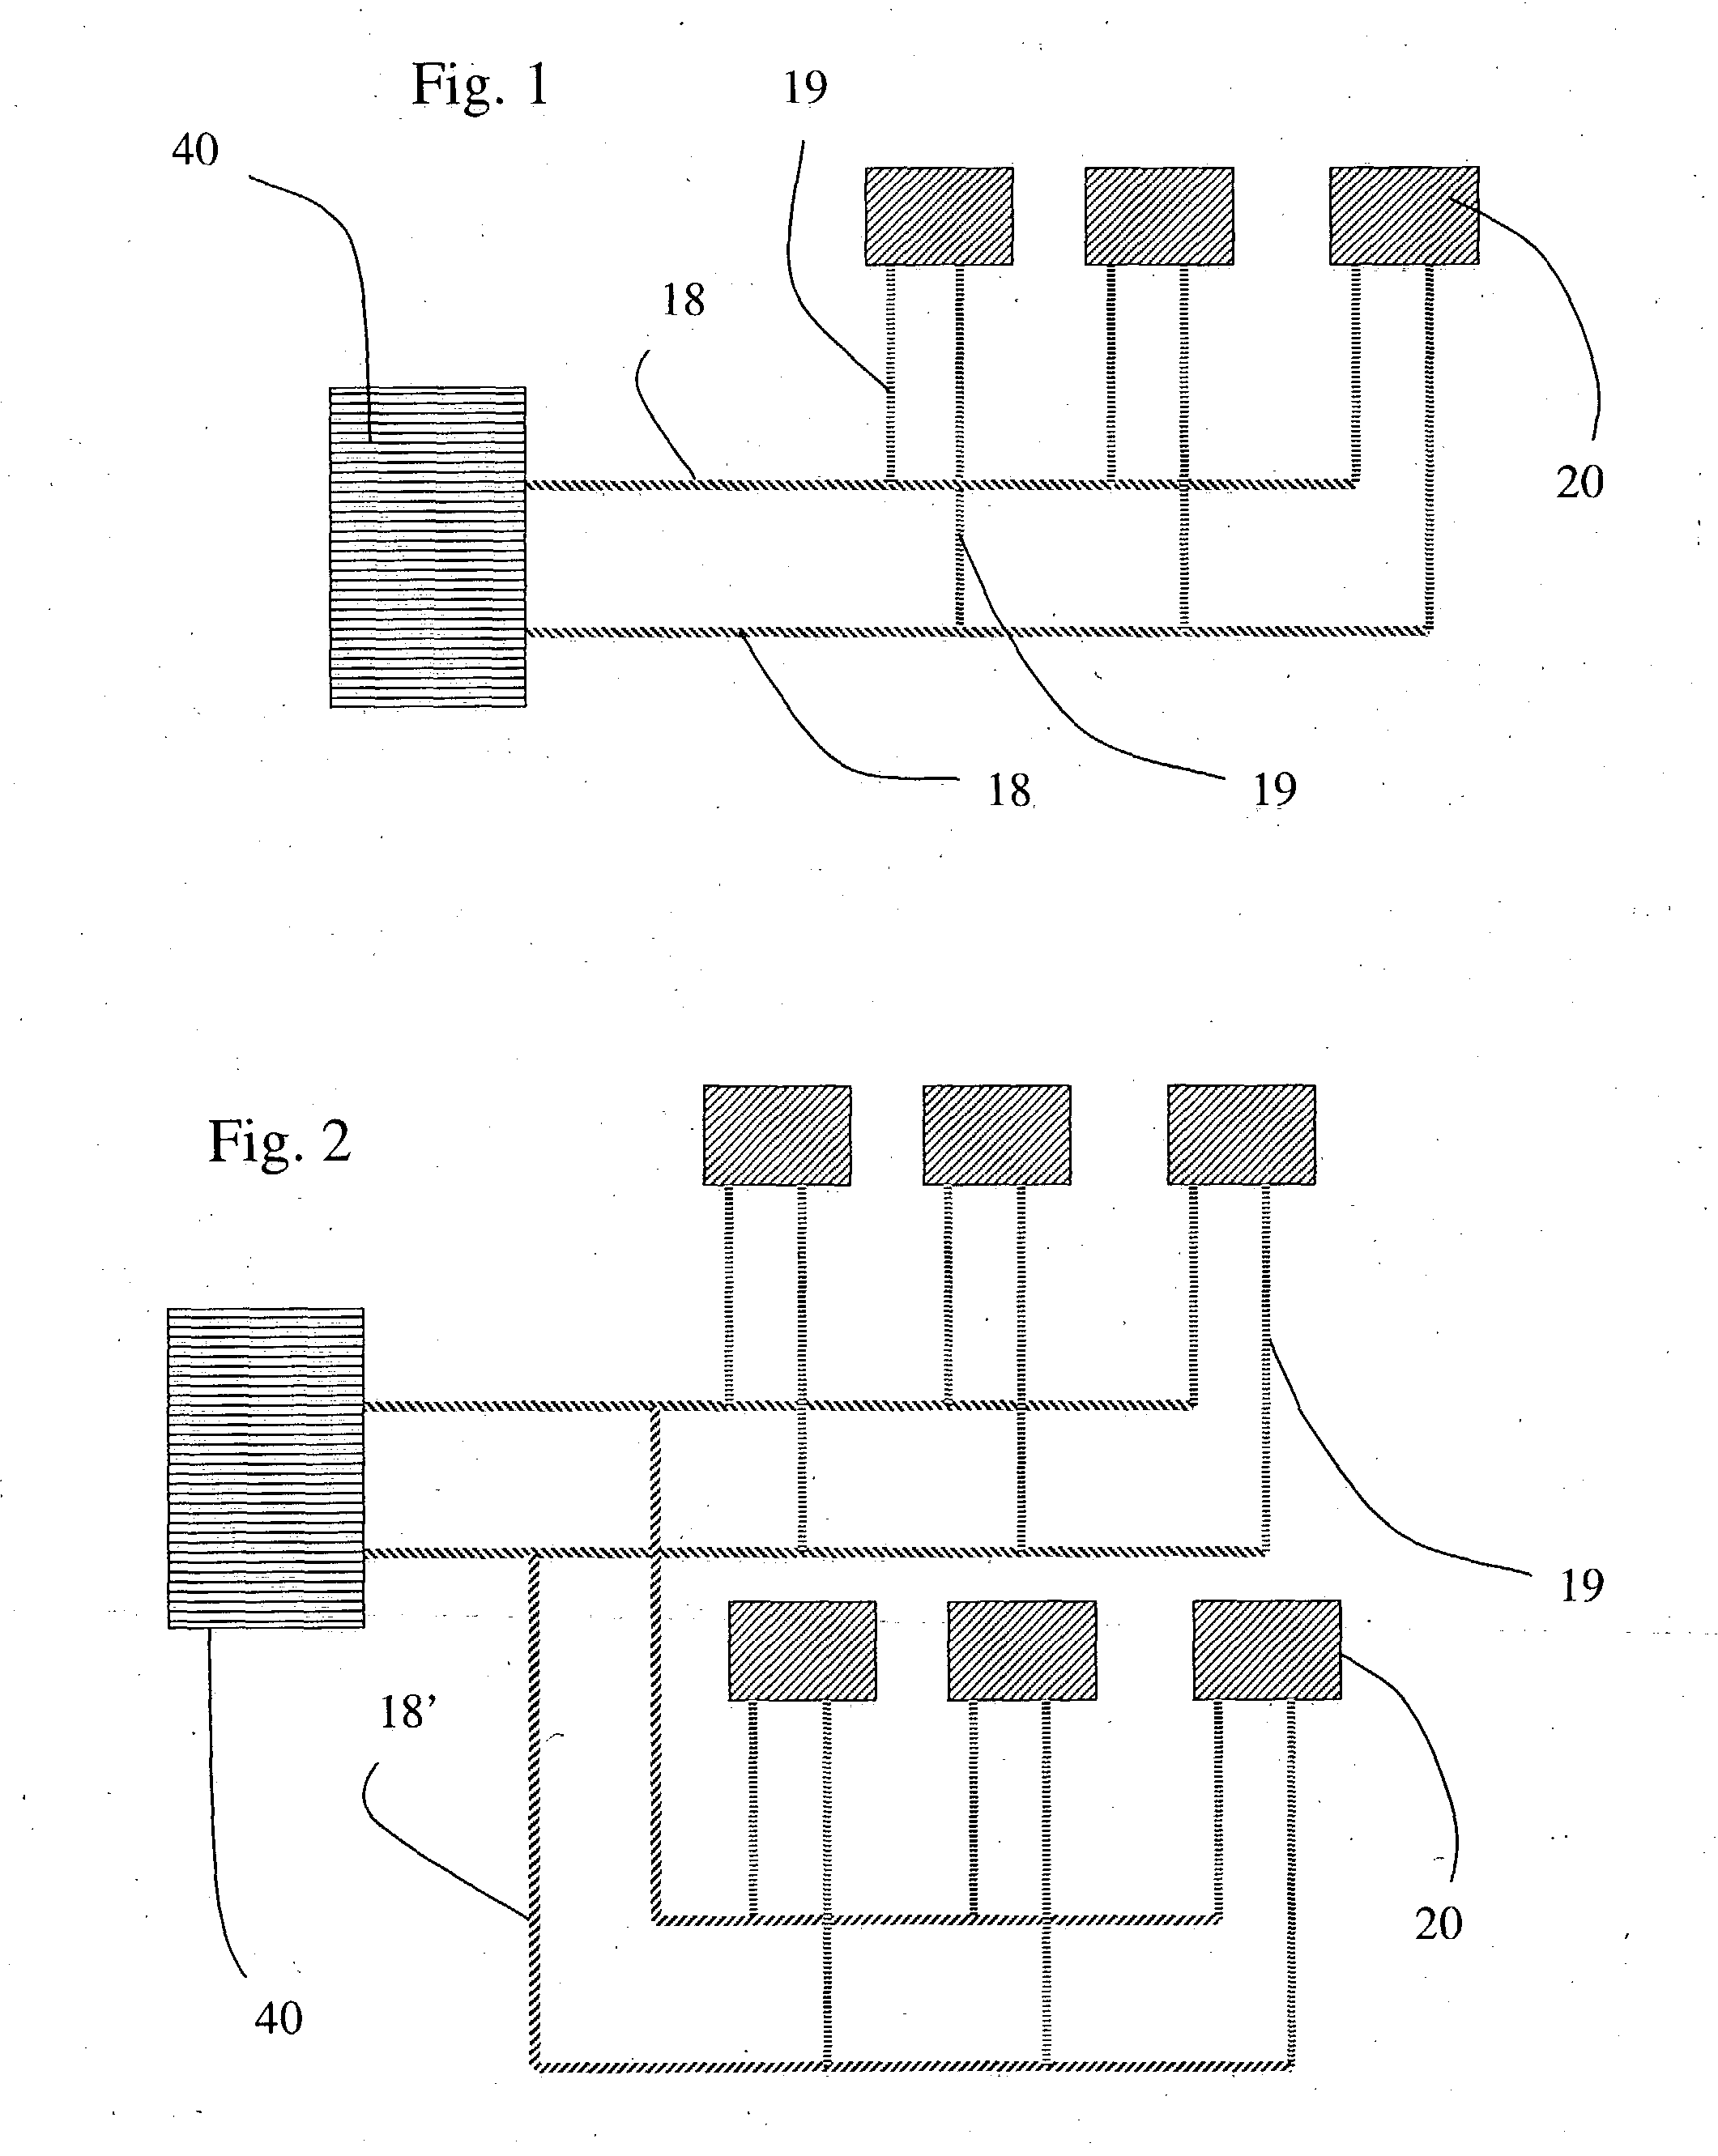 Firing-readiness diagnostic of a pyrotechnic device such as an electronic detonator